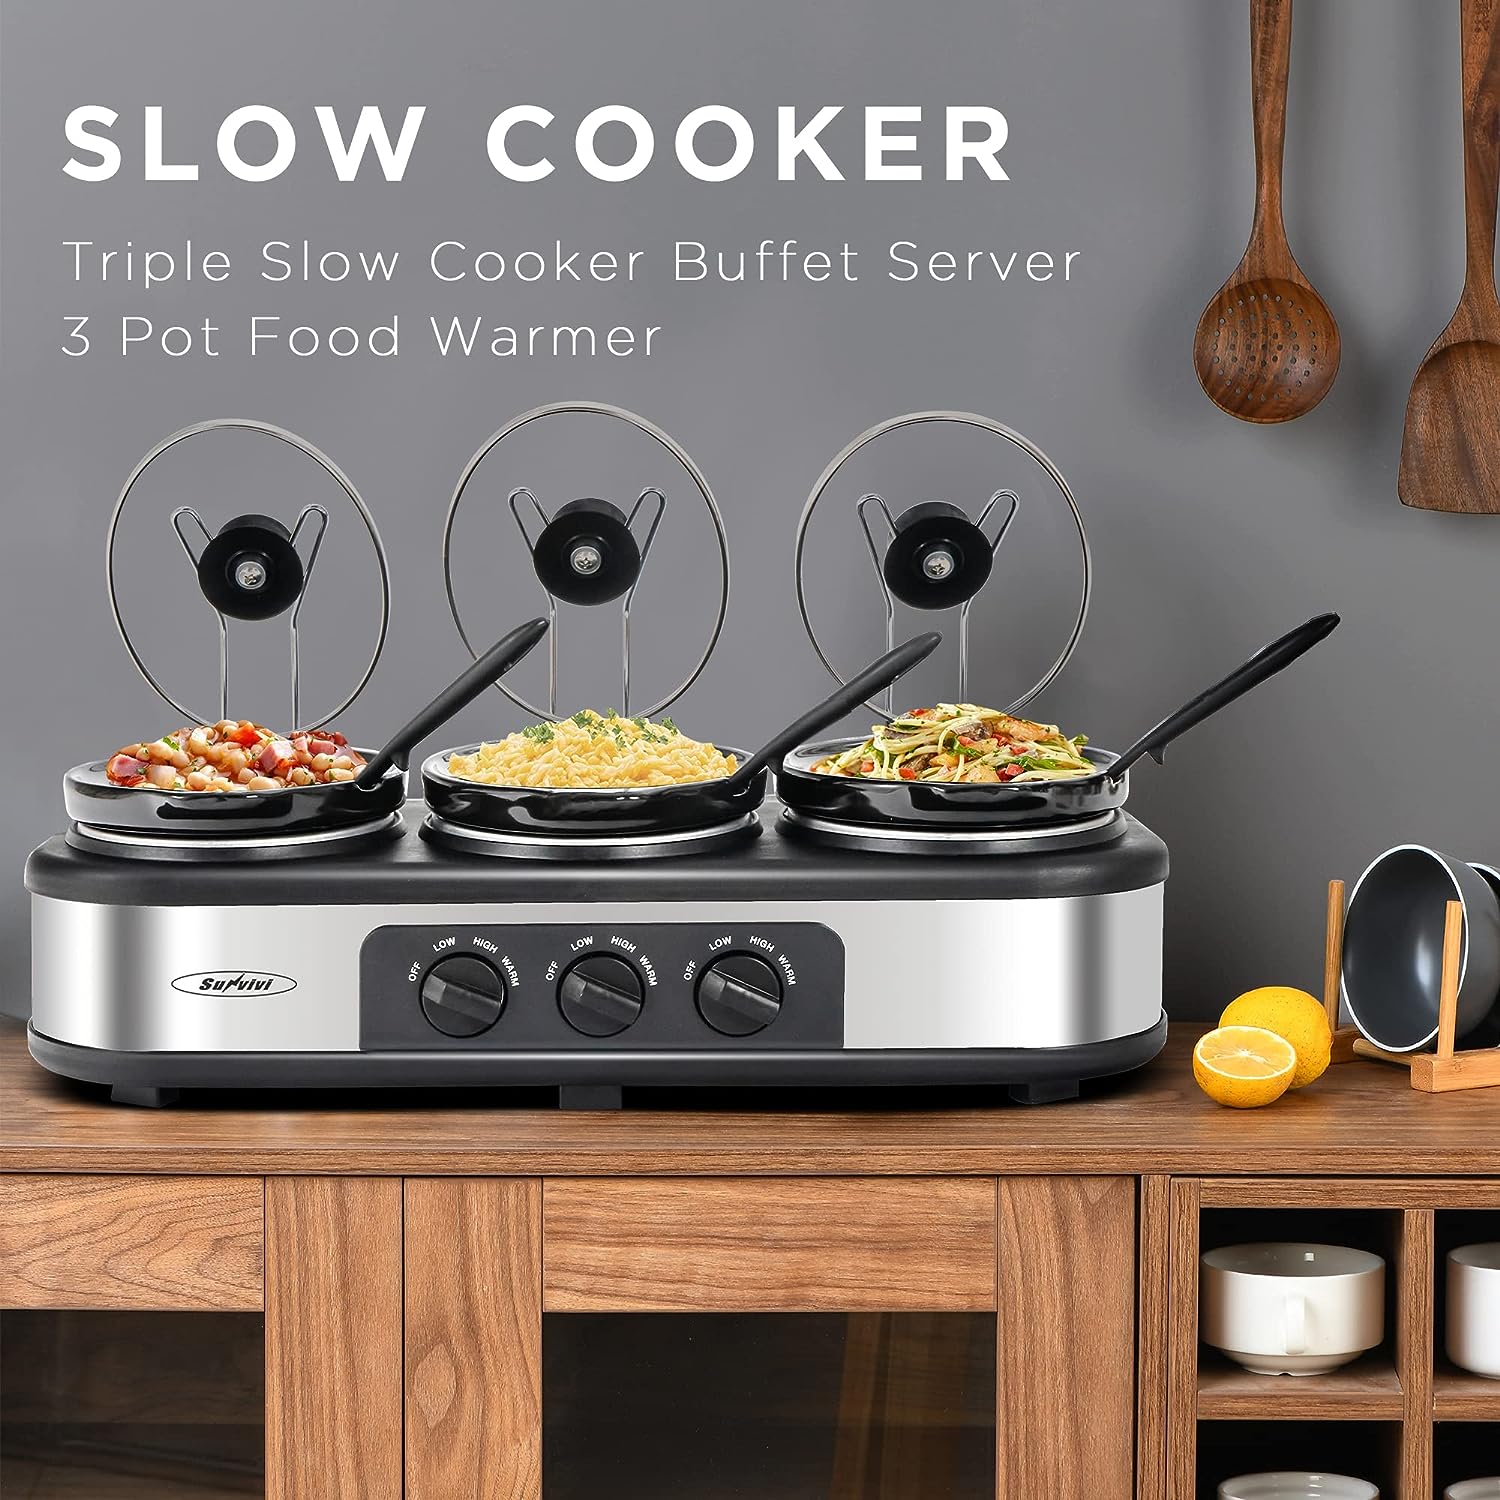 Double Slow Cooker, Buffet Servers and Warmers, Dual 2 Pot Slow